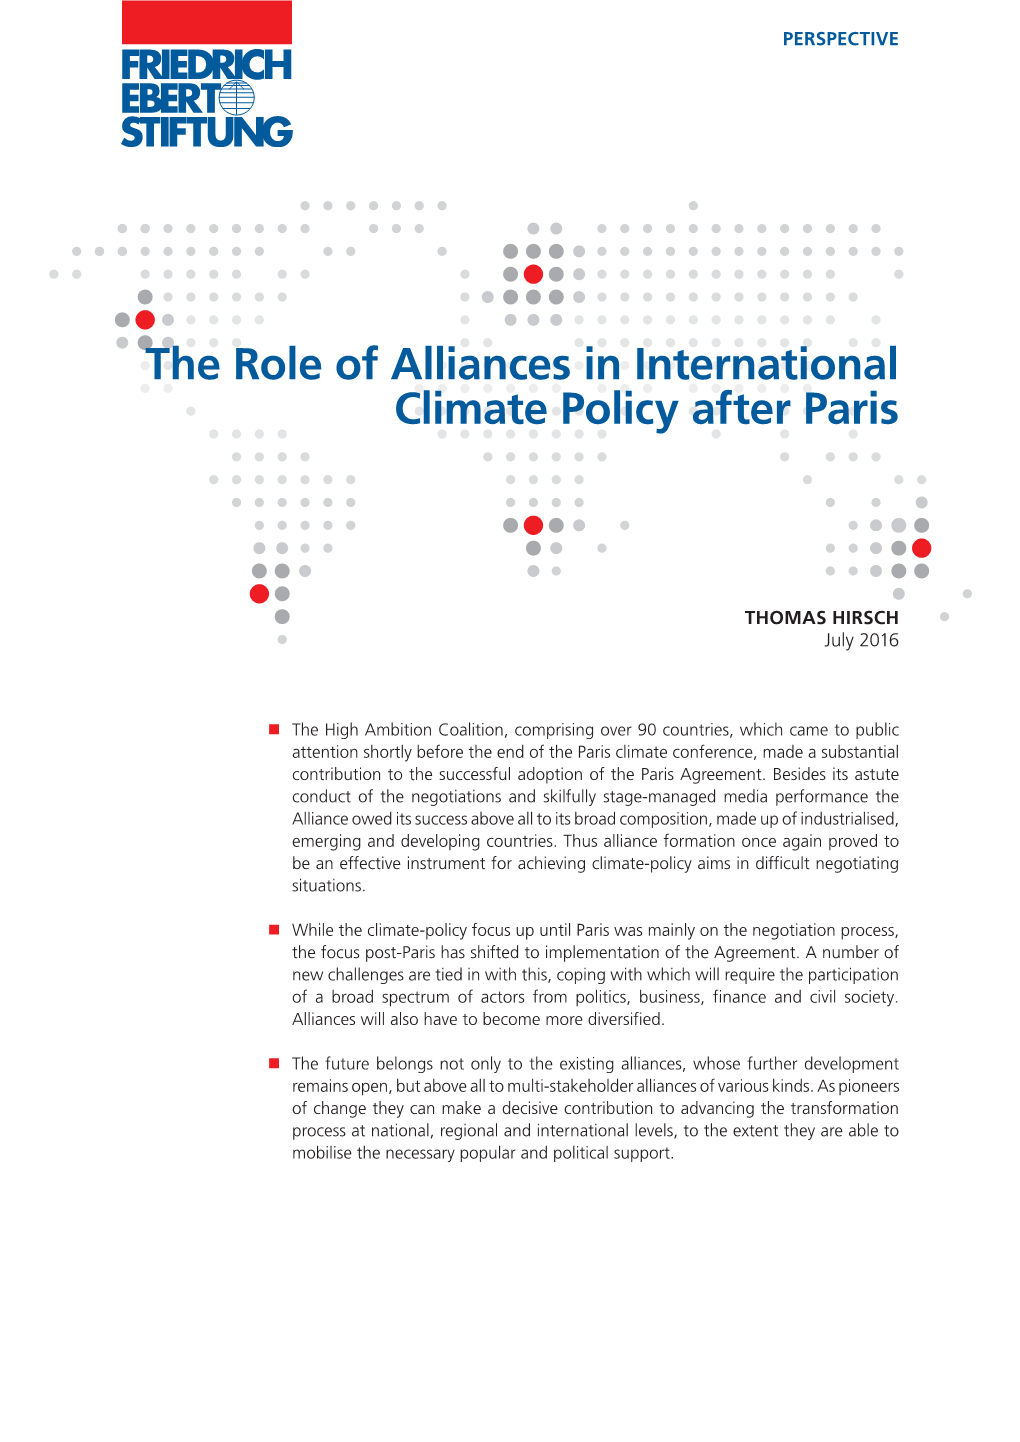 The Role of Alliances in International Climate Policy After Paris